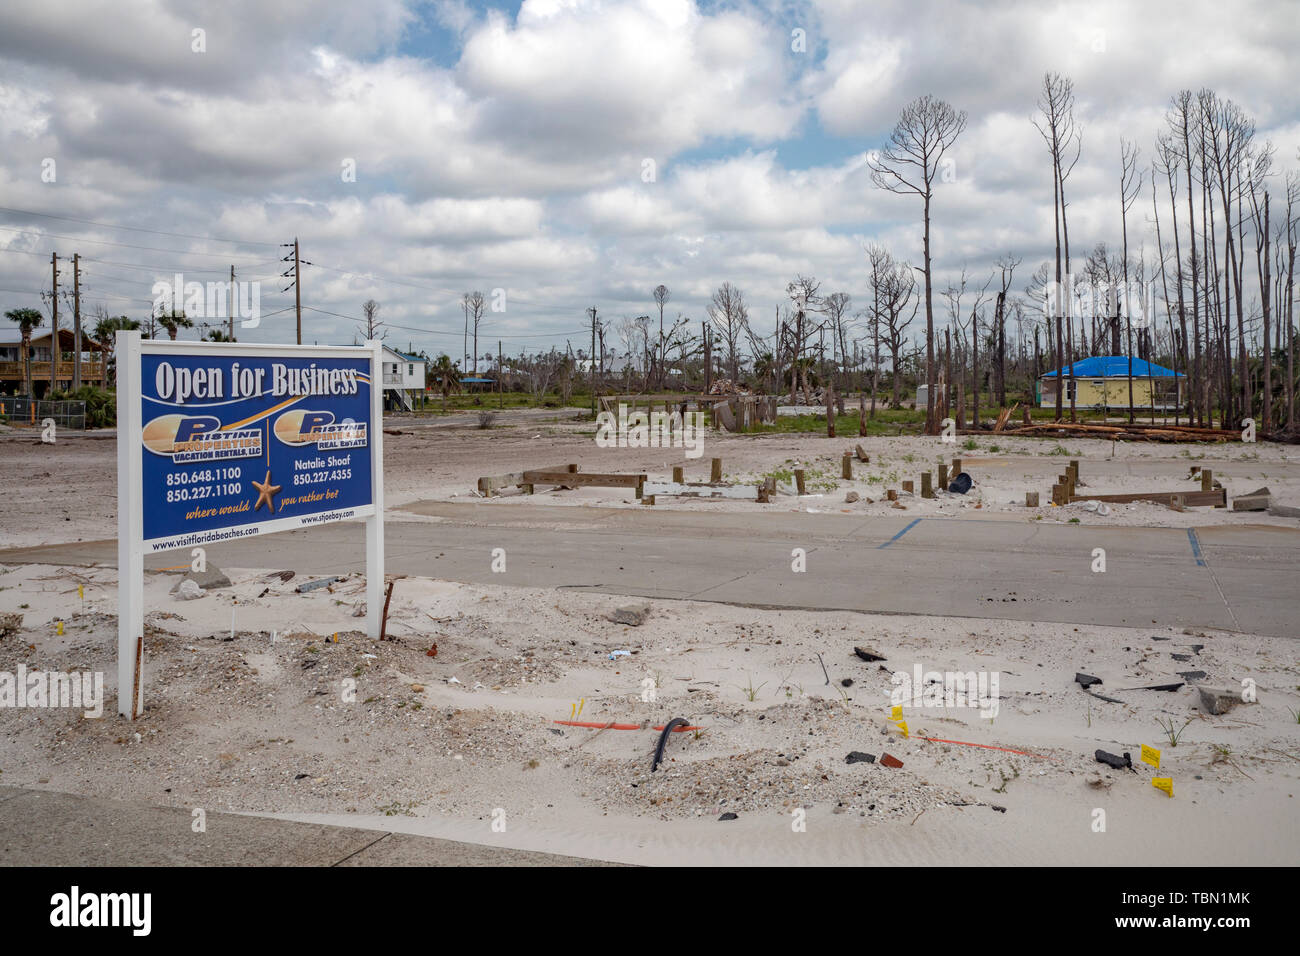 Mexico Beach, Florida - Destruction from Hurricane Michael is widespread seven months after the Category 5 storm hit the Florida Panhandle. A sign nea Stock Photo